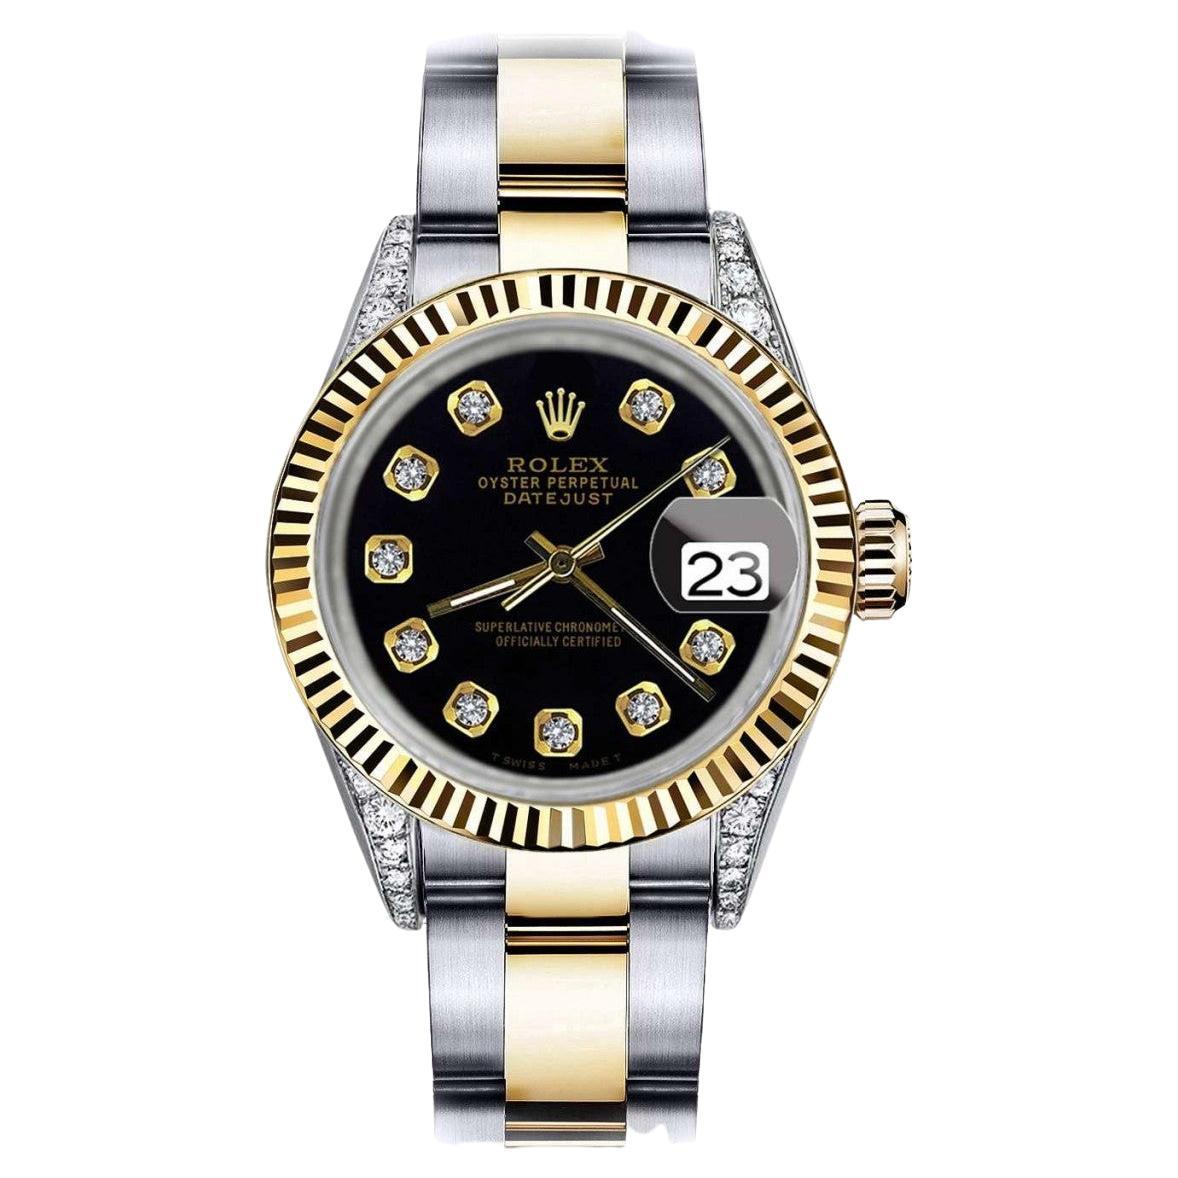 Rolex Datejust Two Tone Black Color Dial with Diamond Accent+Lugs For Sale